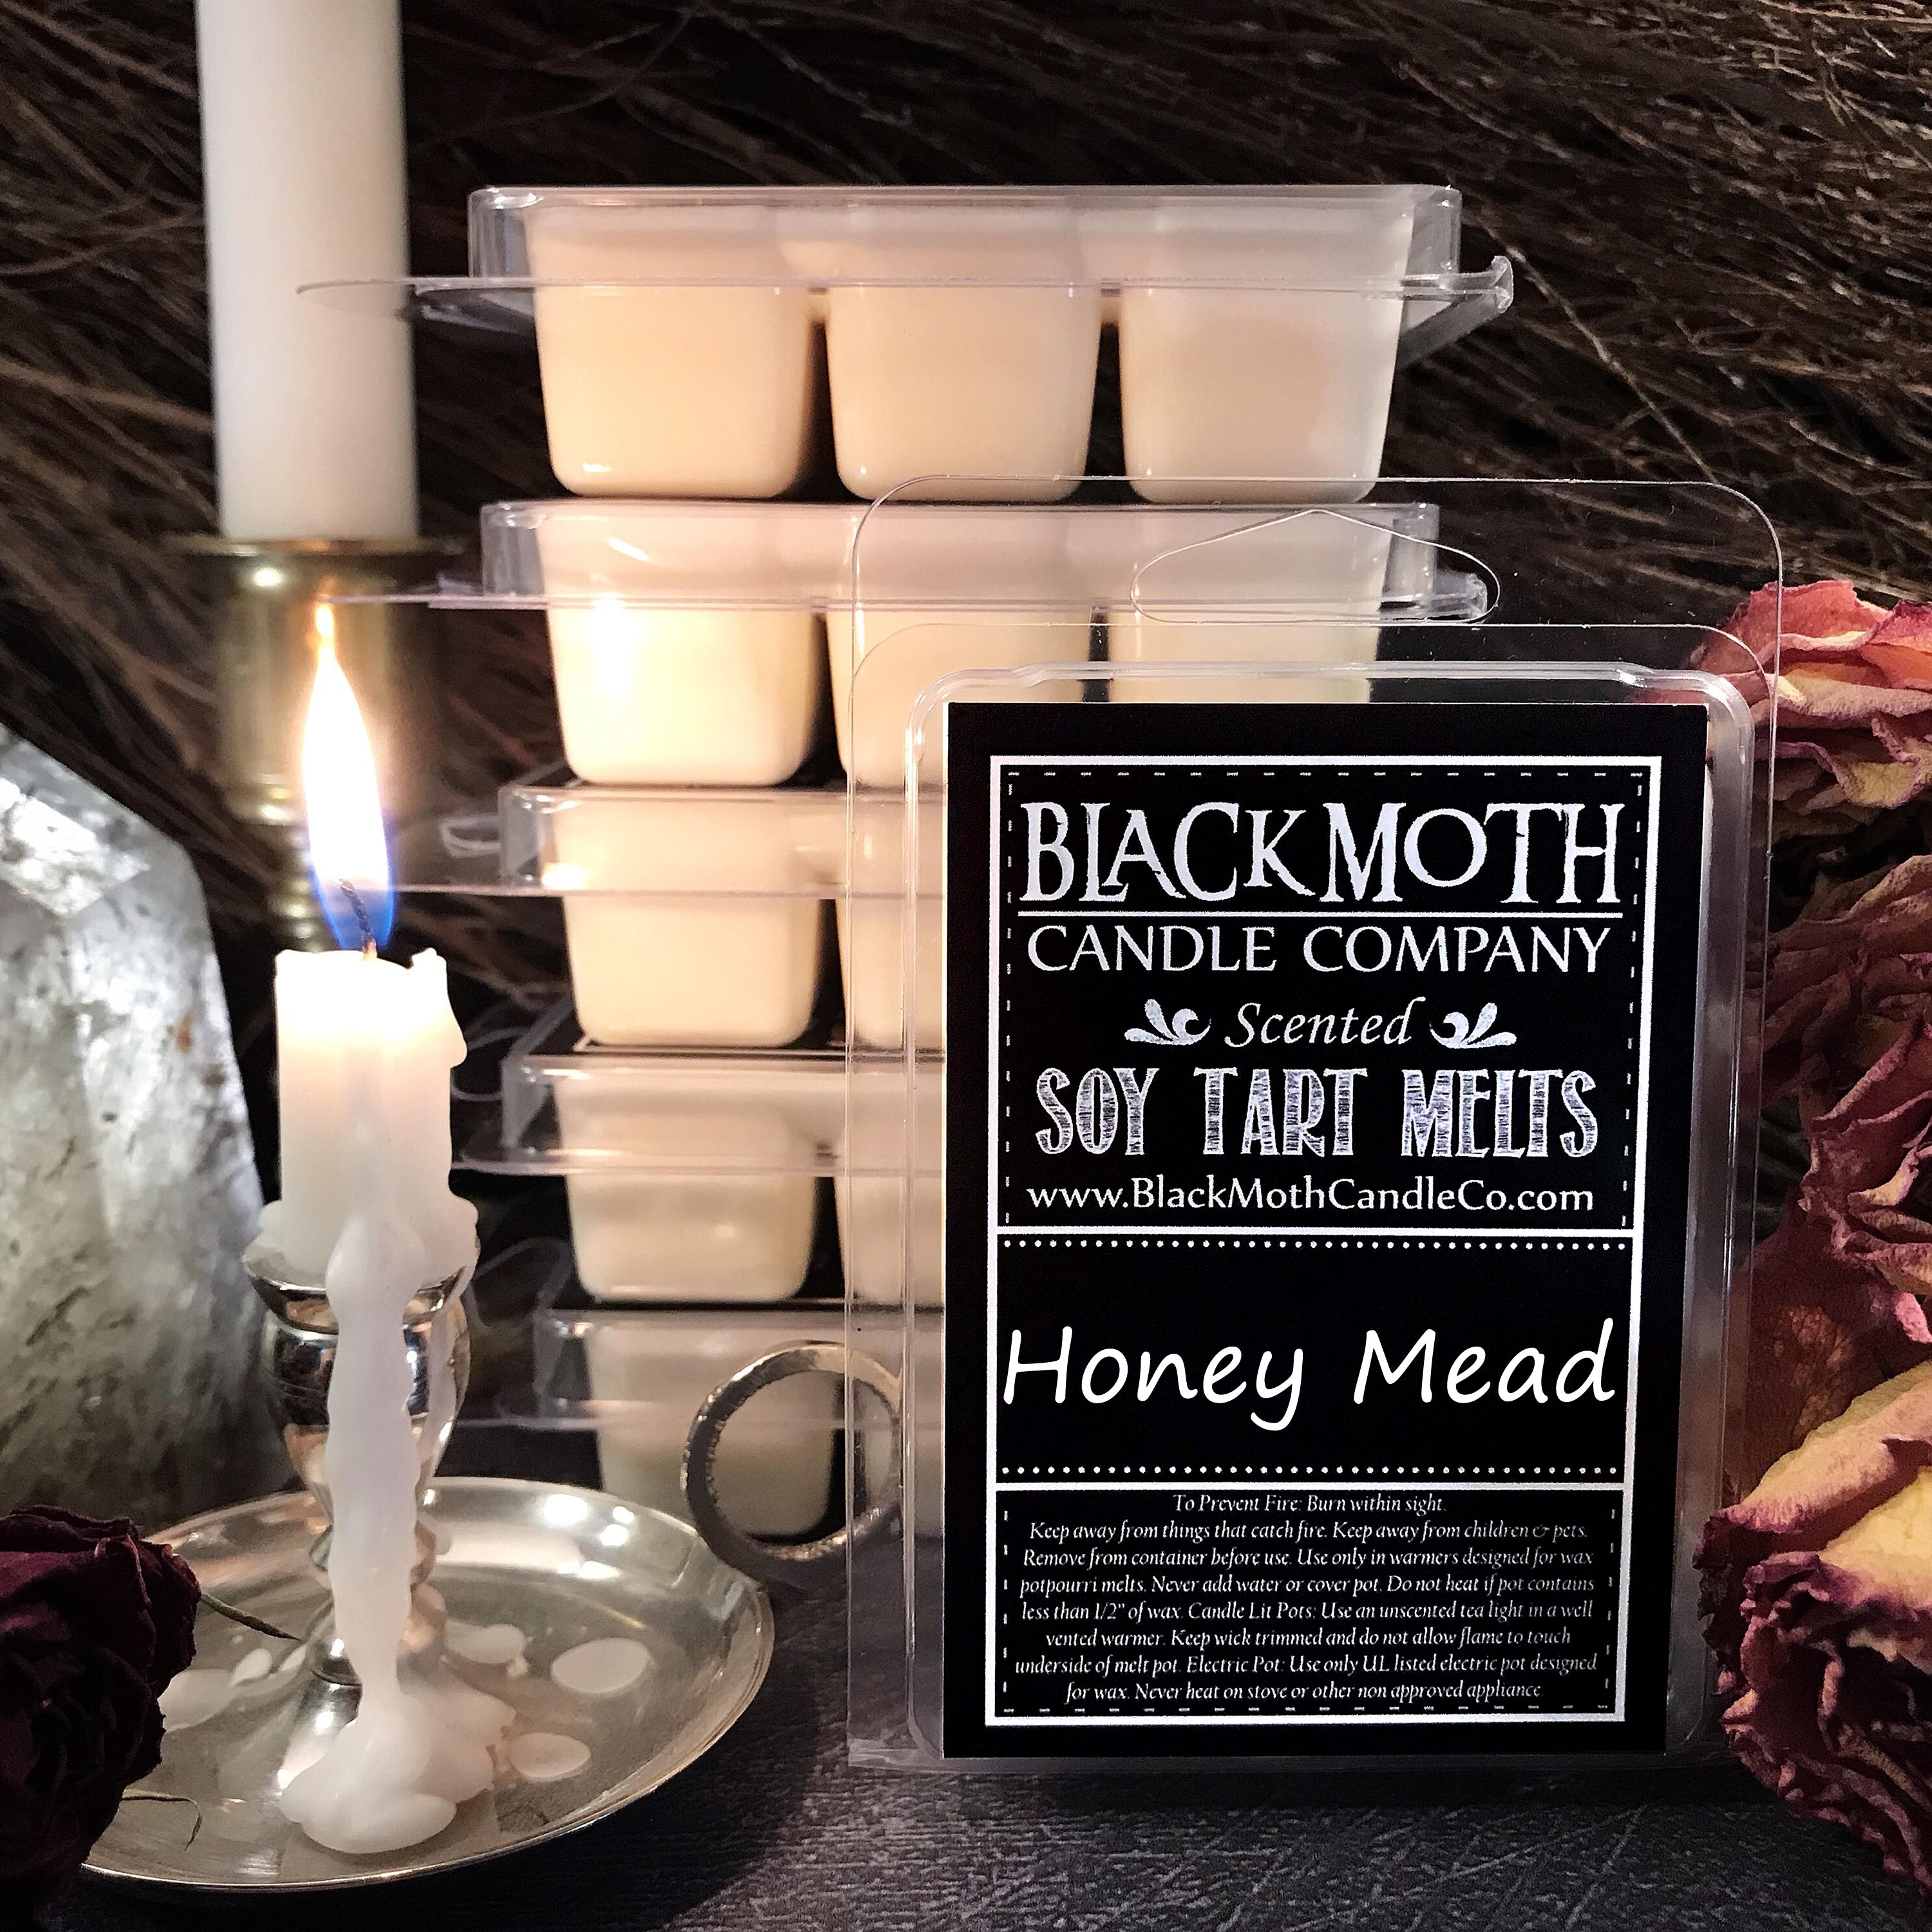 Honey Mead Scented Soy Wax Melts